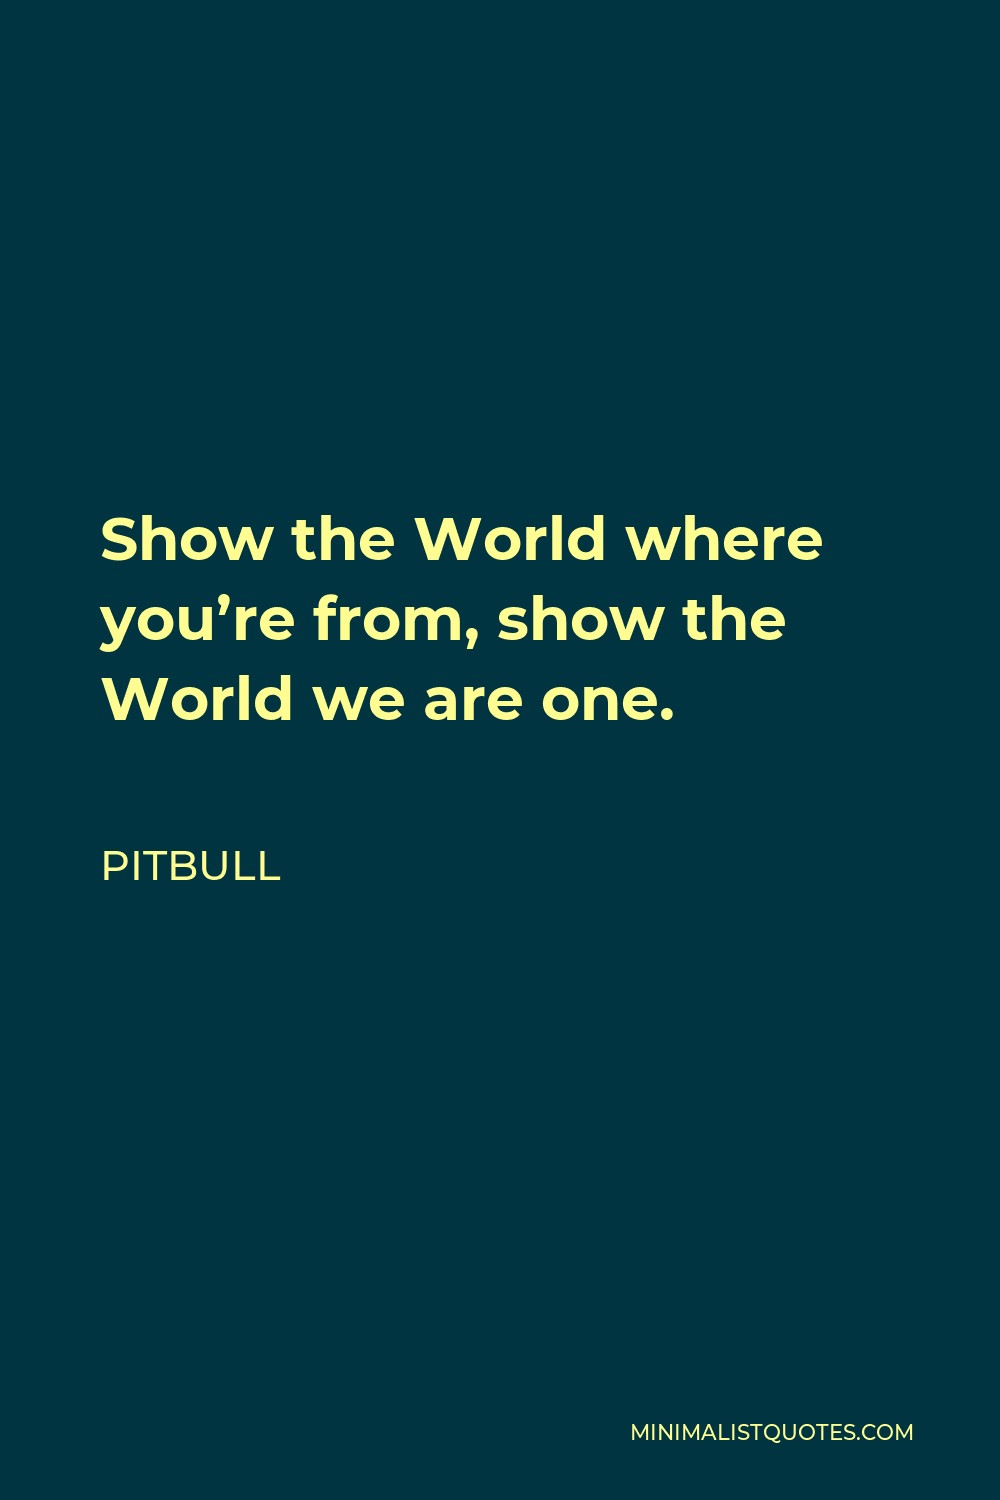 Pitbull Quote - Show the World where you’re from, show the World we are one.